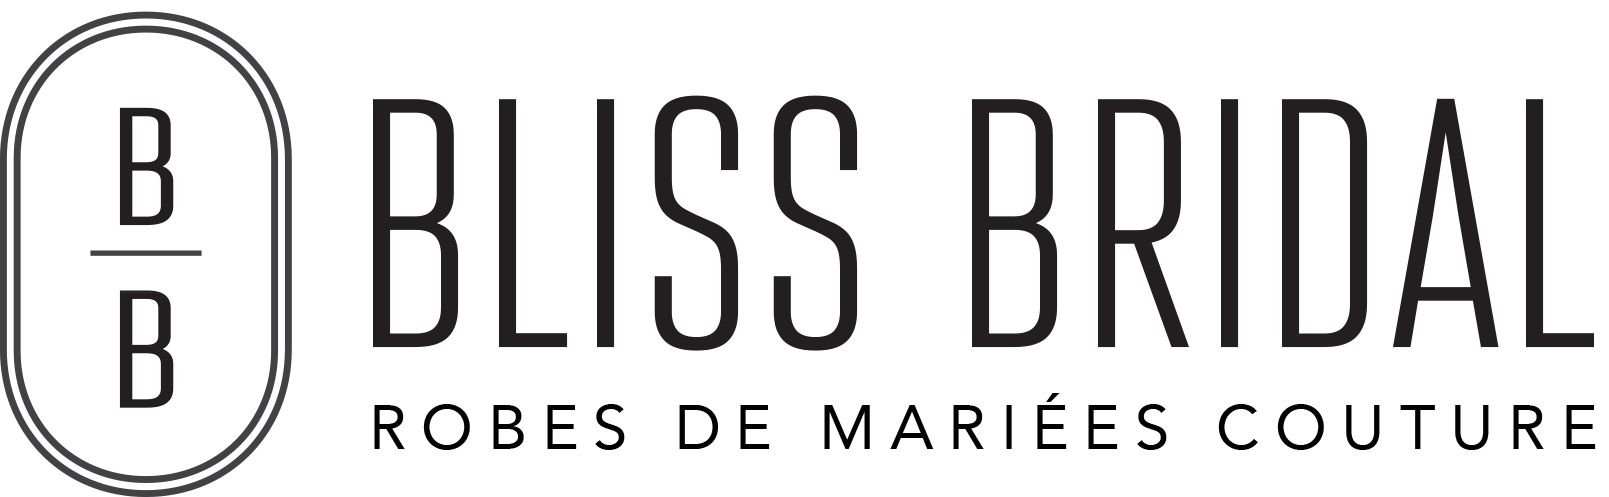 Wedding Dresses | Bliss Bridal Luxembourg